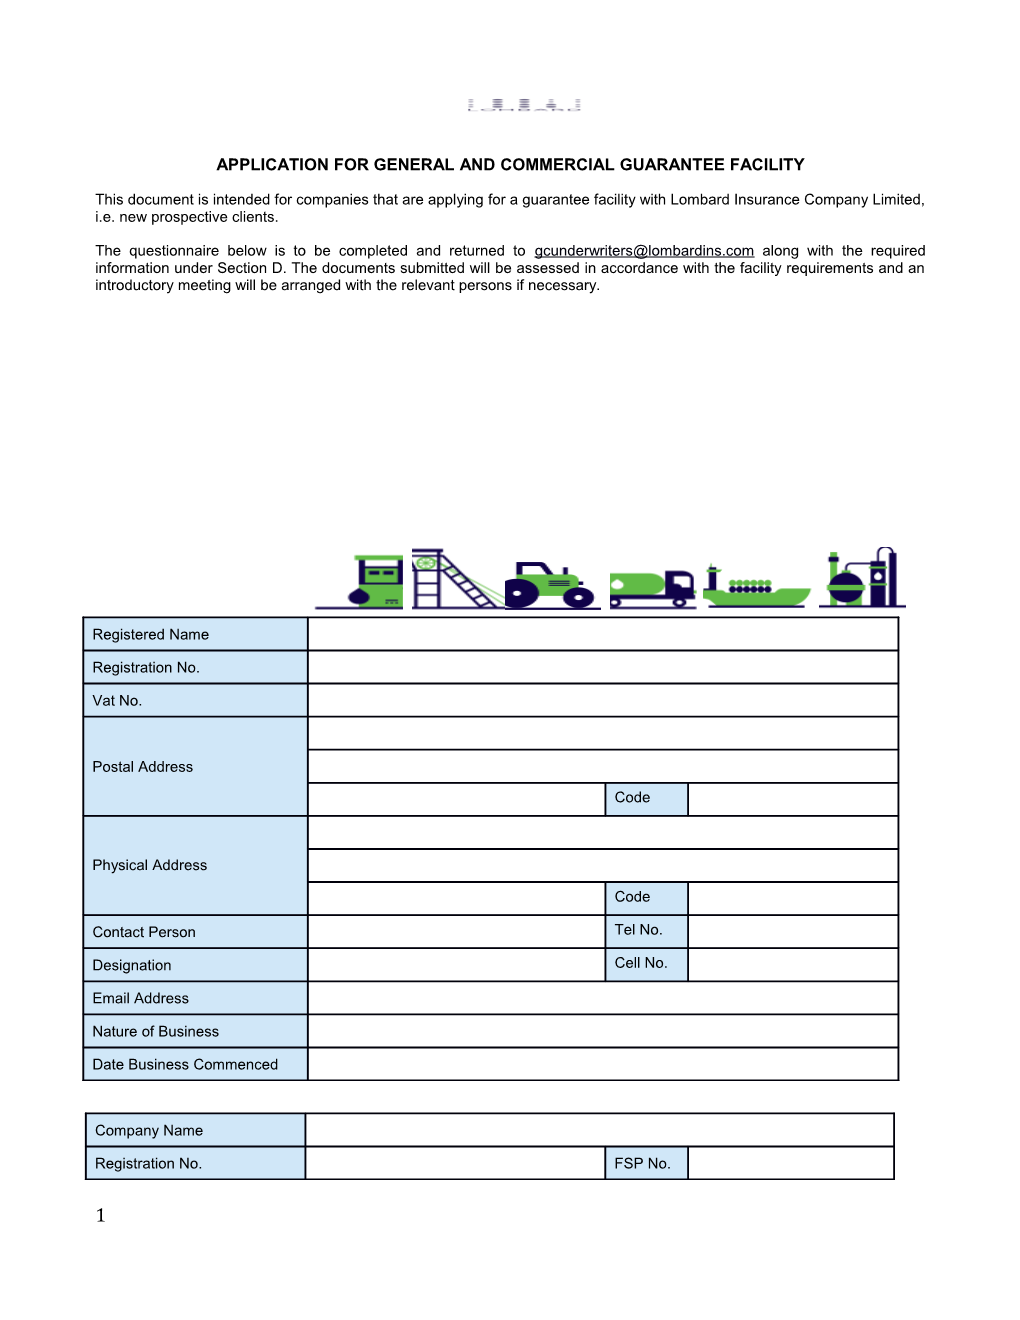 Application for General and Commercial Guarantee Facility